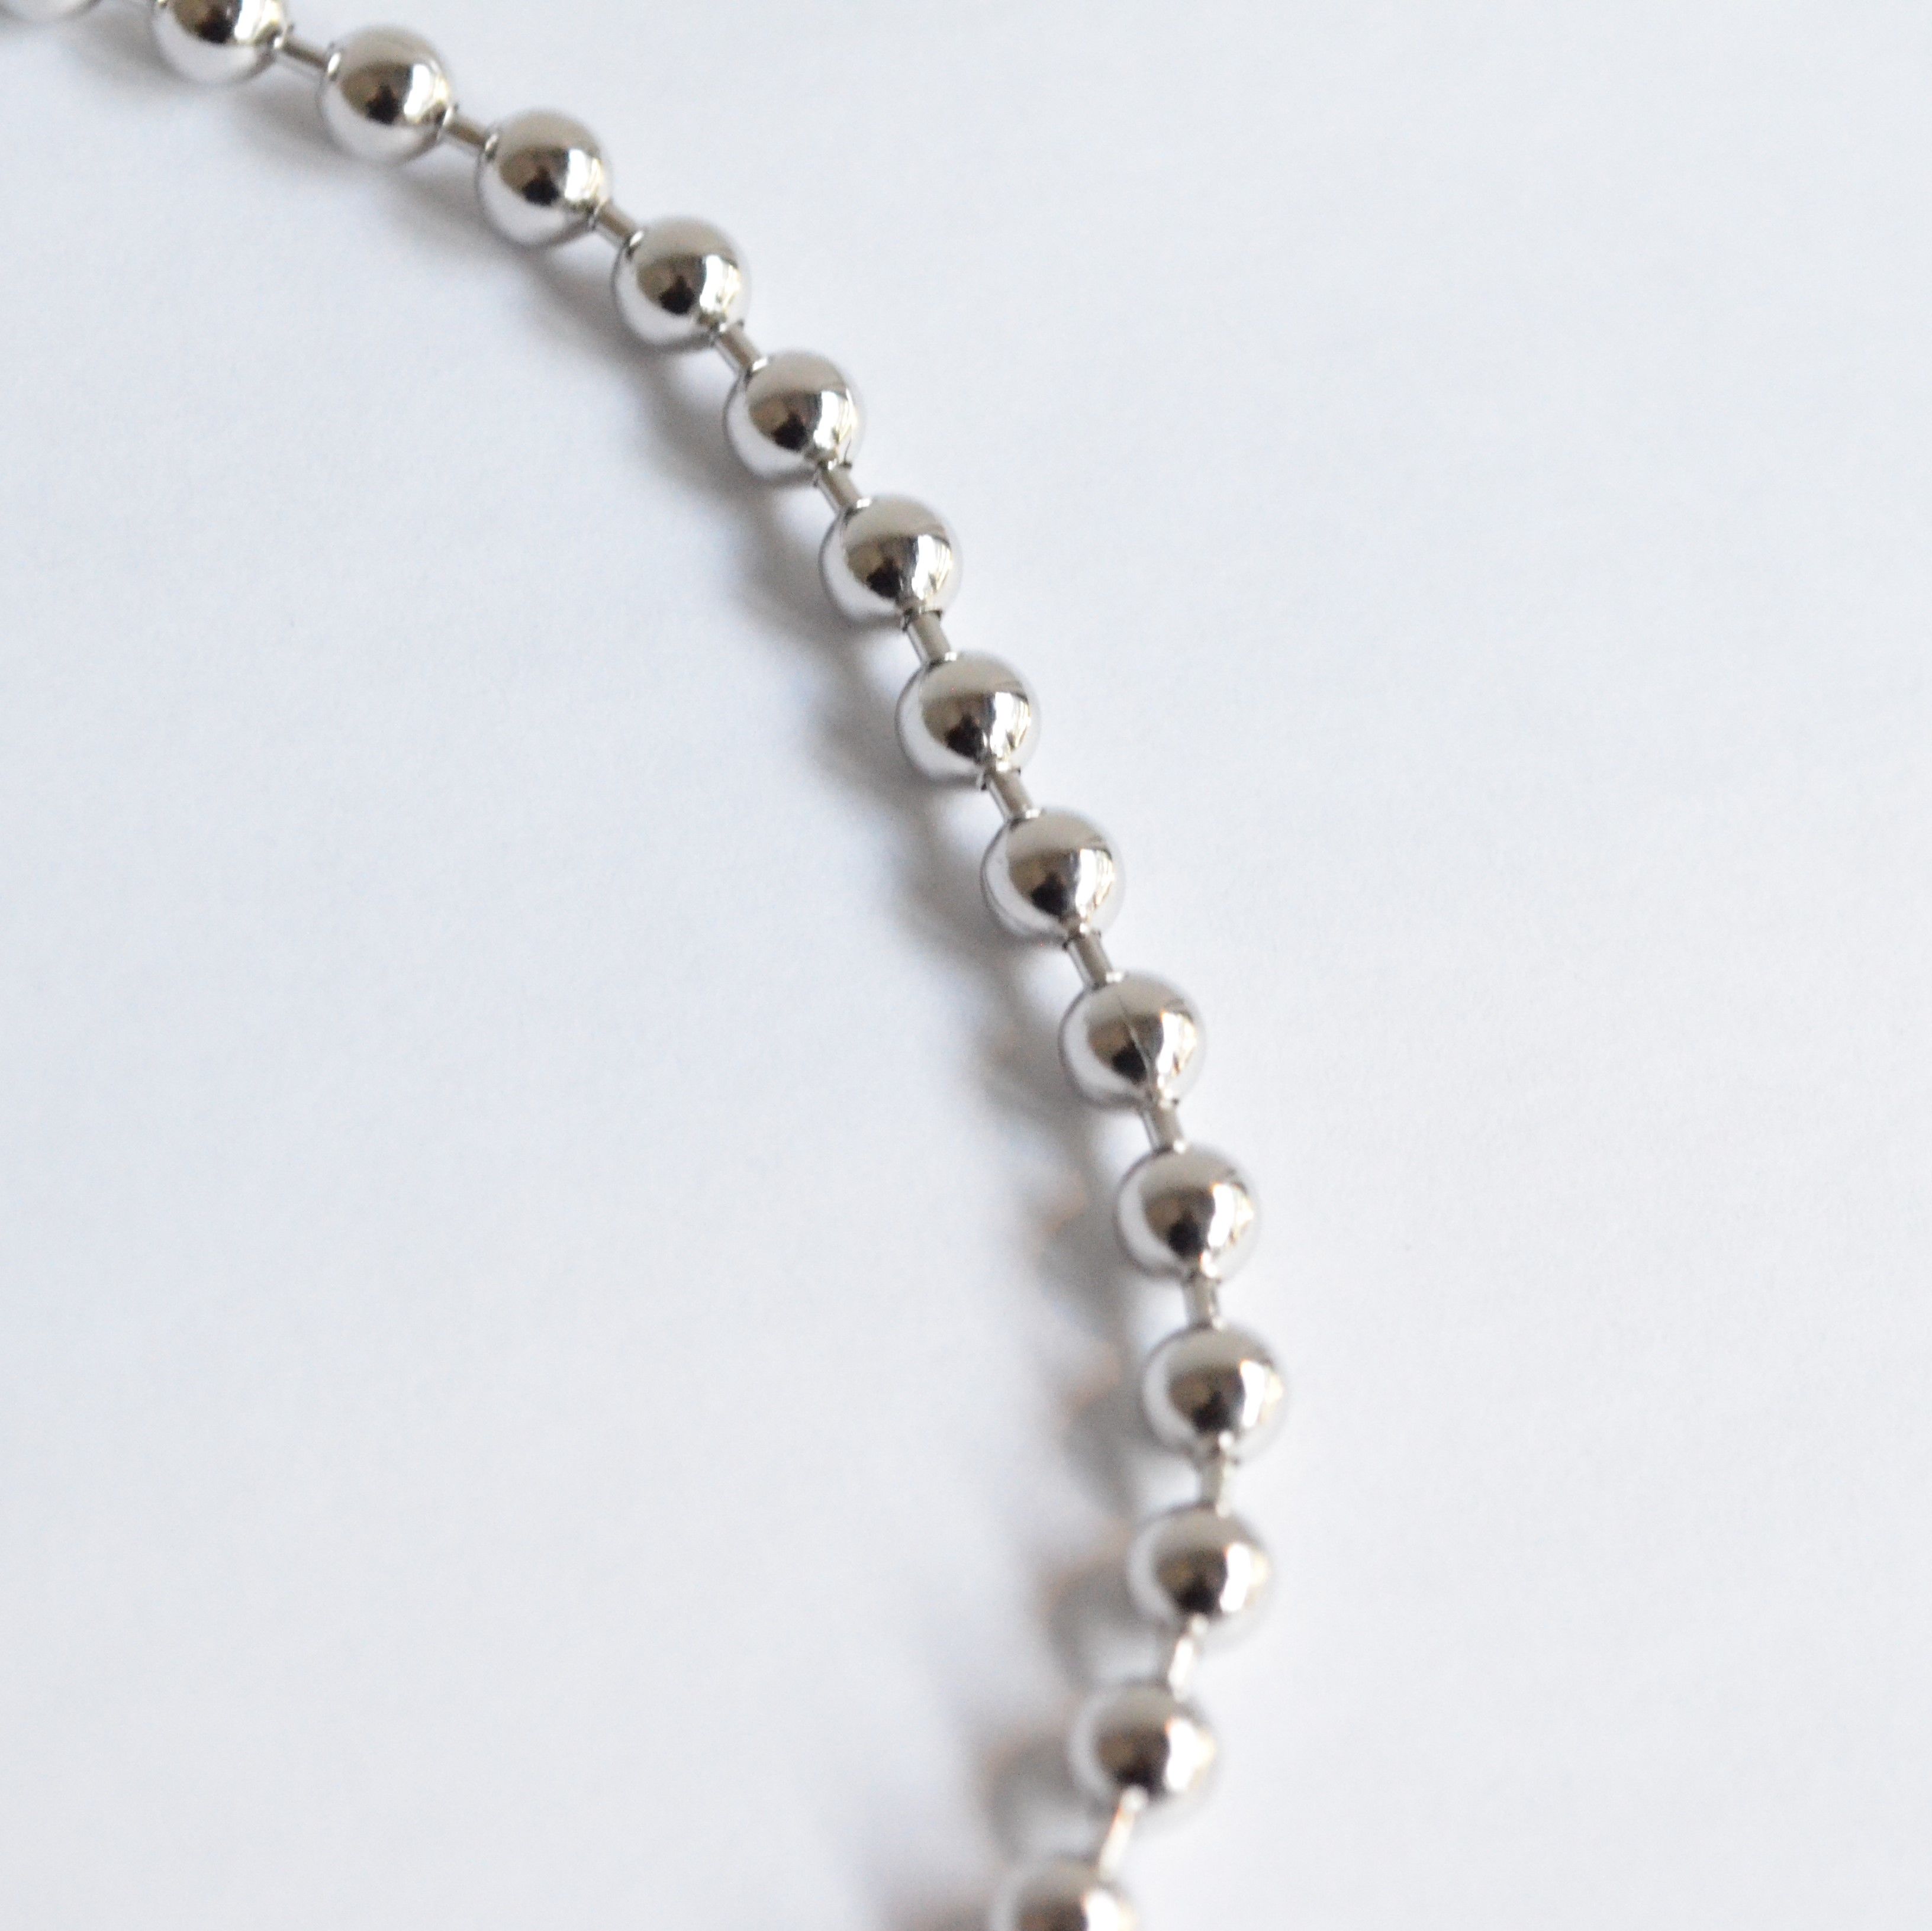 5mm ball chain necklace (silver)